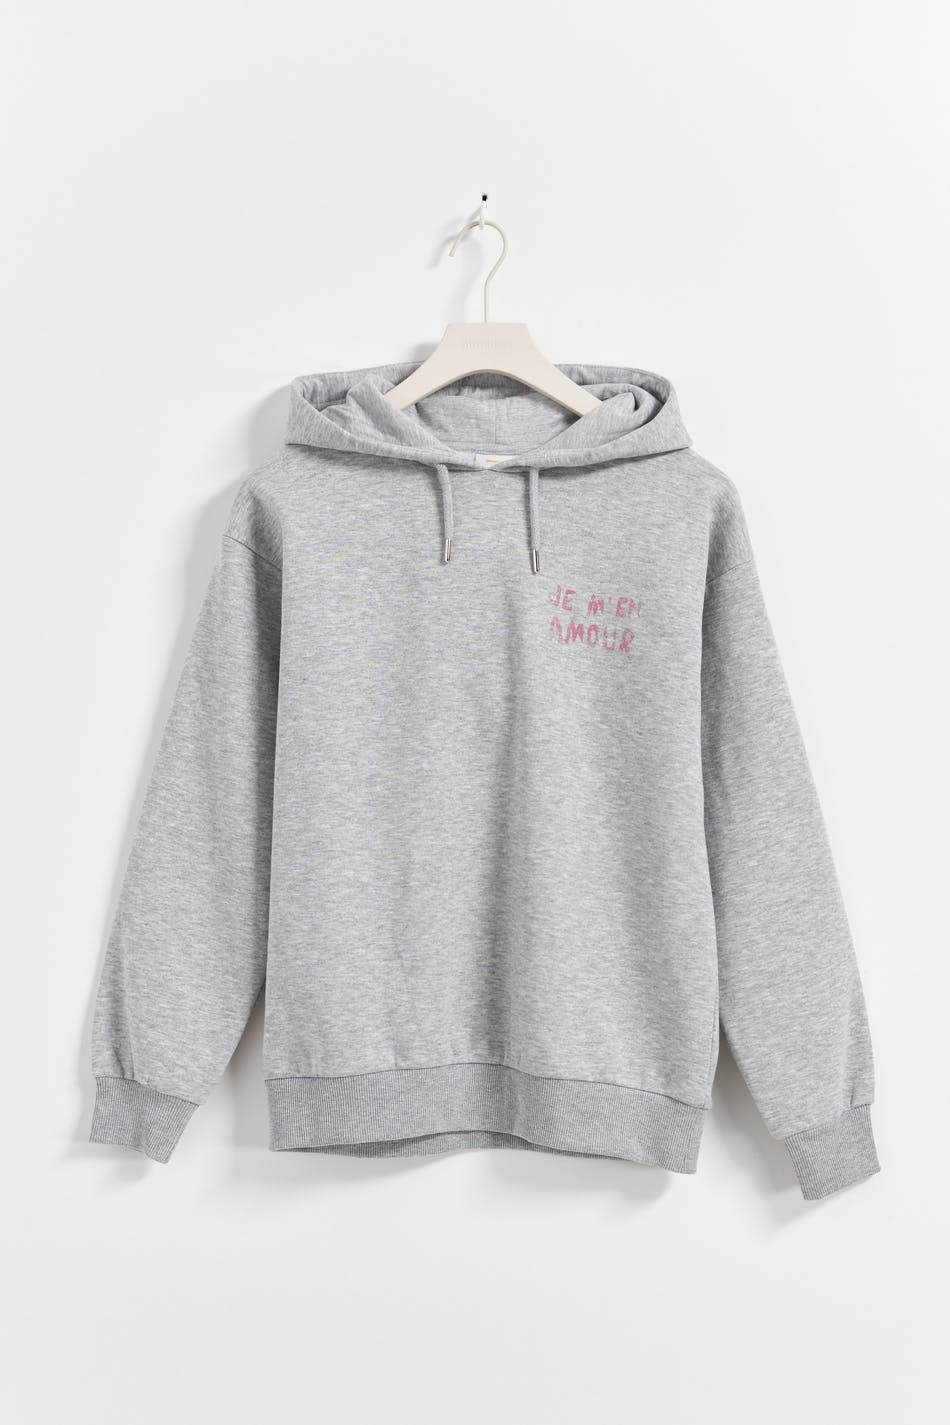 Gina Tricot - Y basic hood - young-tops - Grey - 158/164 - Female